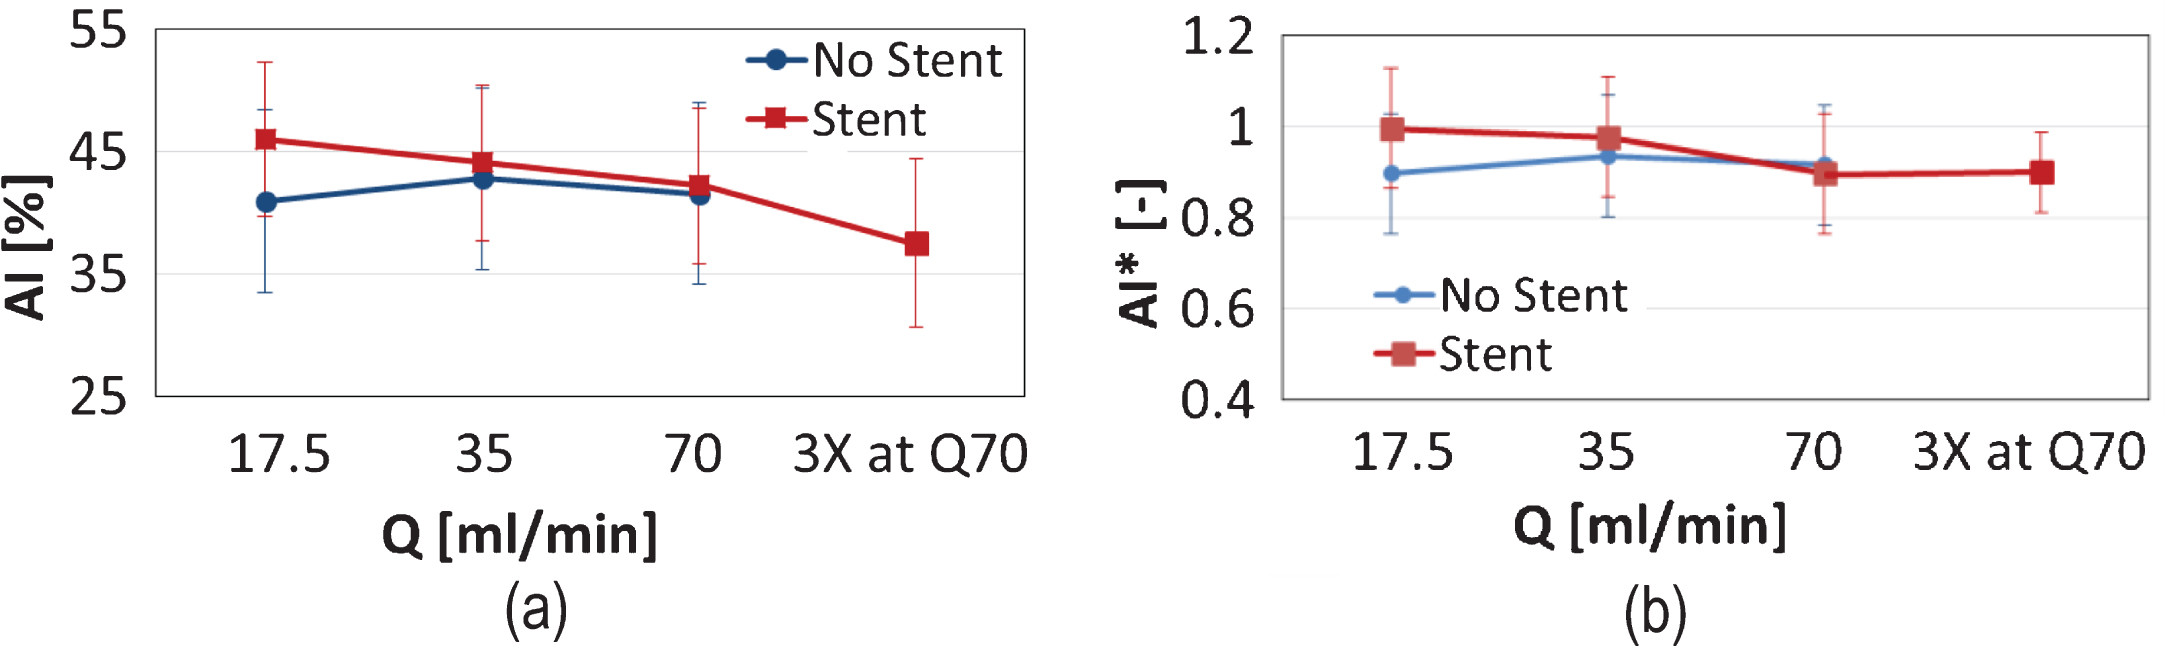 Mean values of the RBC aggregation index AI, for the AB sample, at the two tube configurations, and all flow conditions (please note that no 3XQ70 exposure was performed for the non-stented case). Panel (a) illustrates the mean value of AI (as percentage) and Panel (b) presents the values of AI normalised by the baseline values.